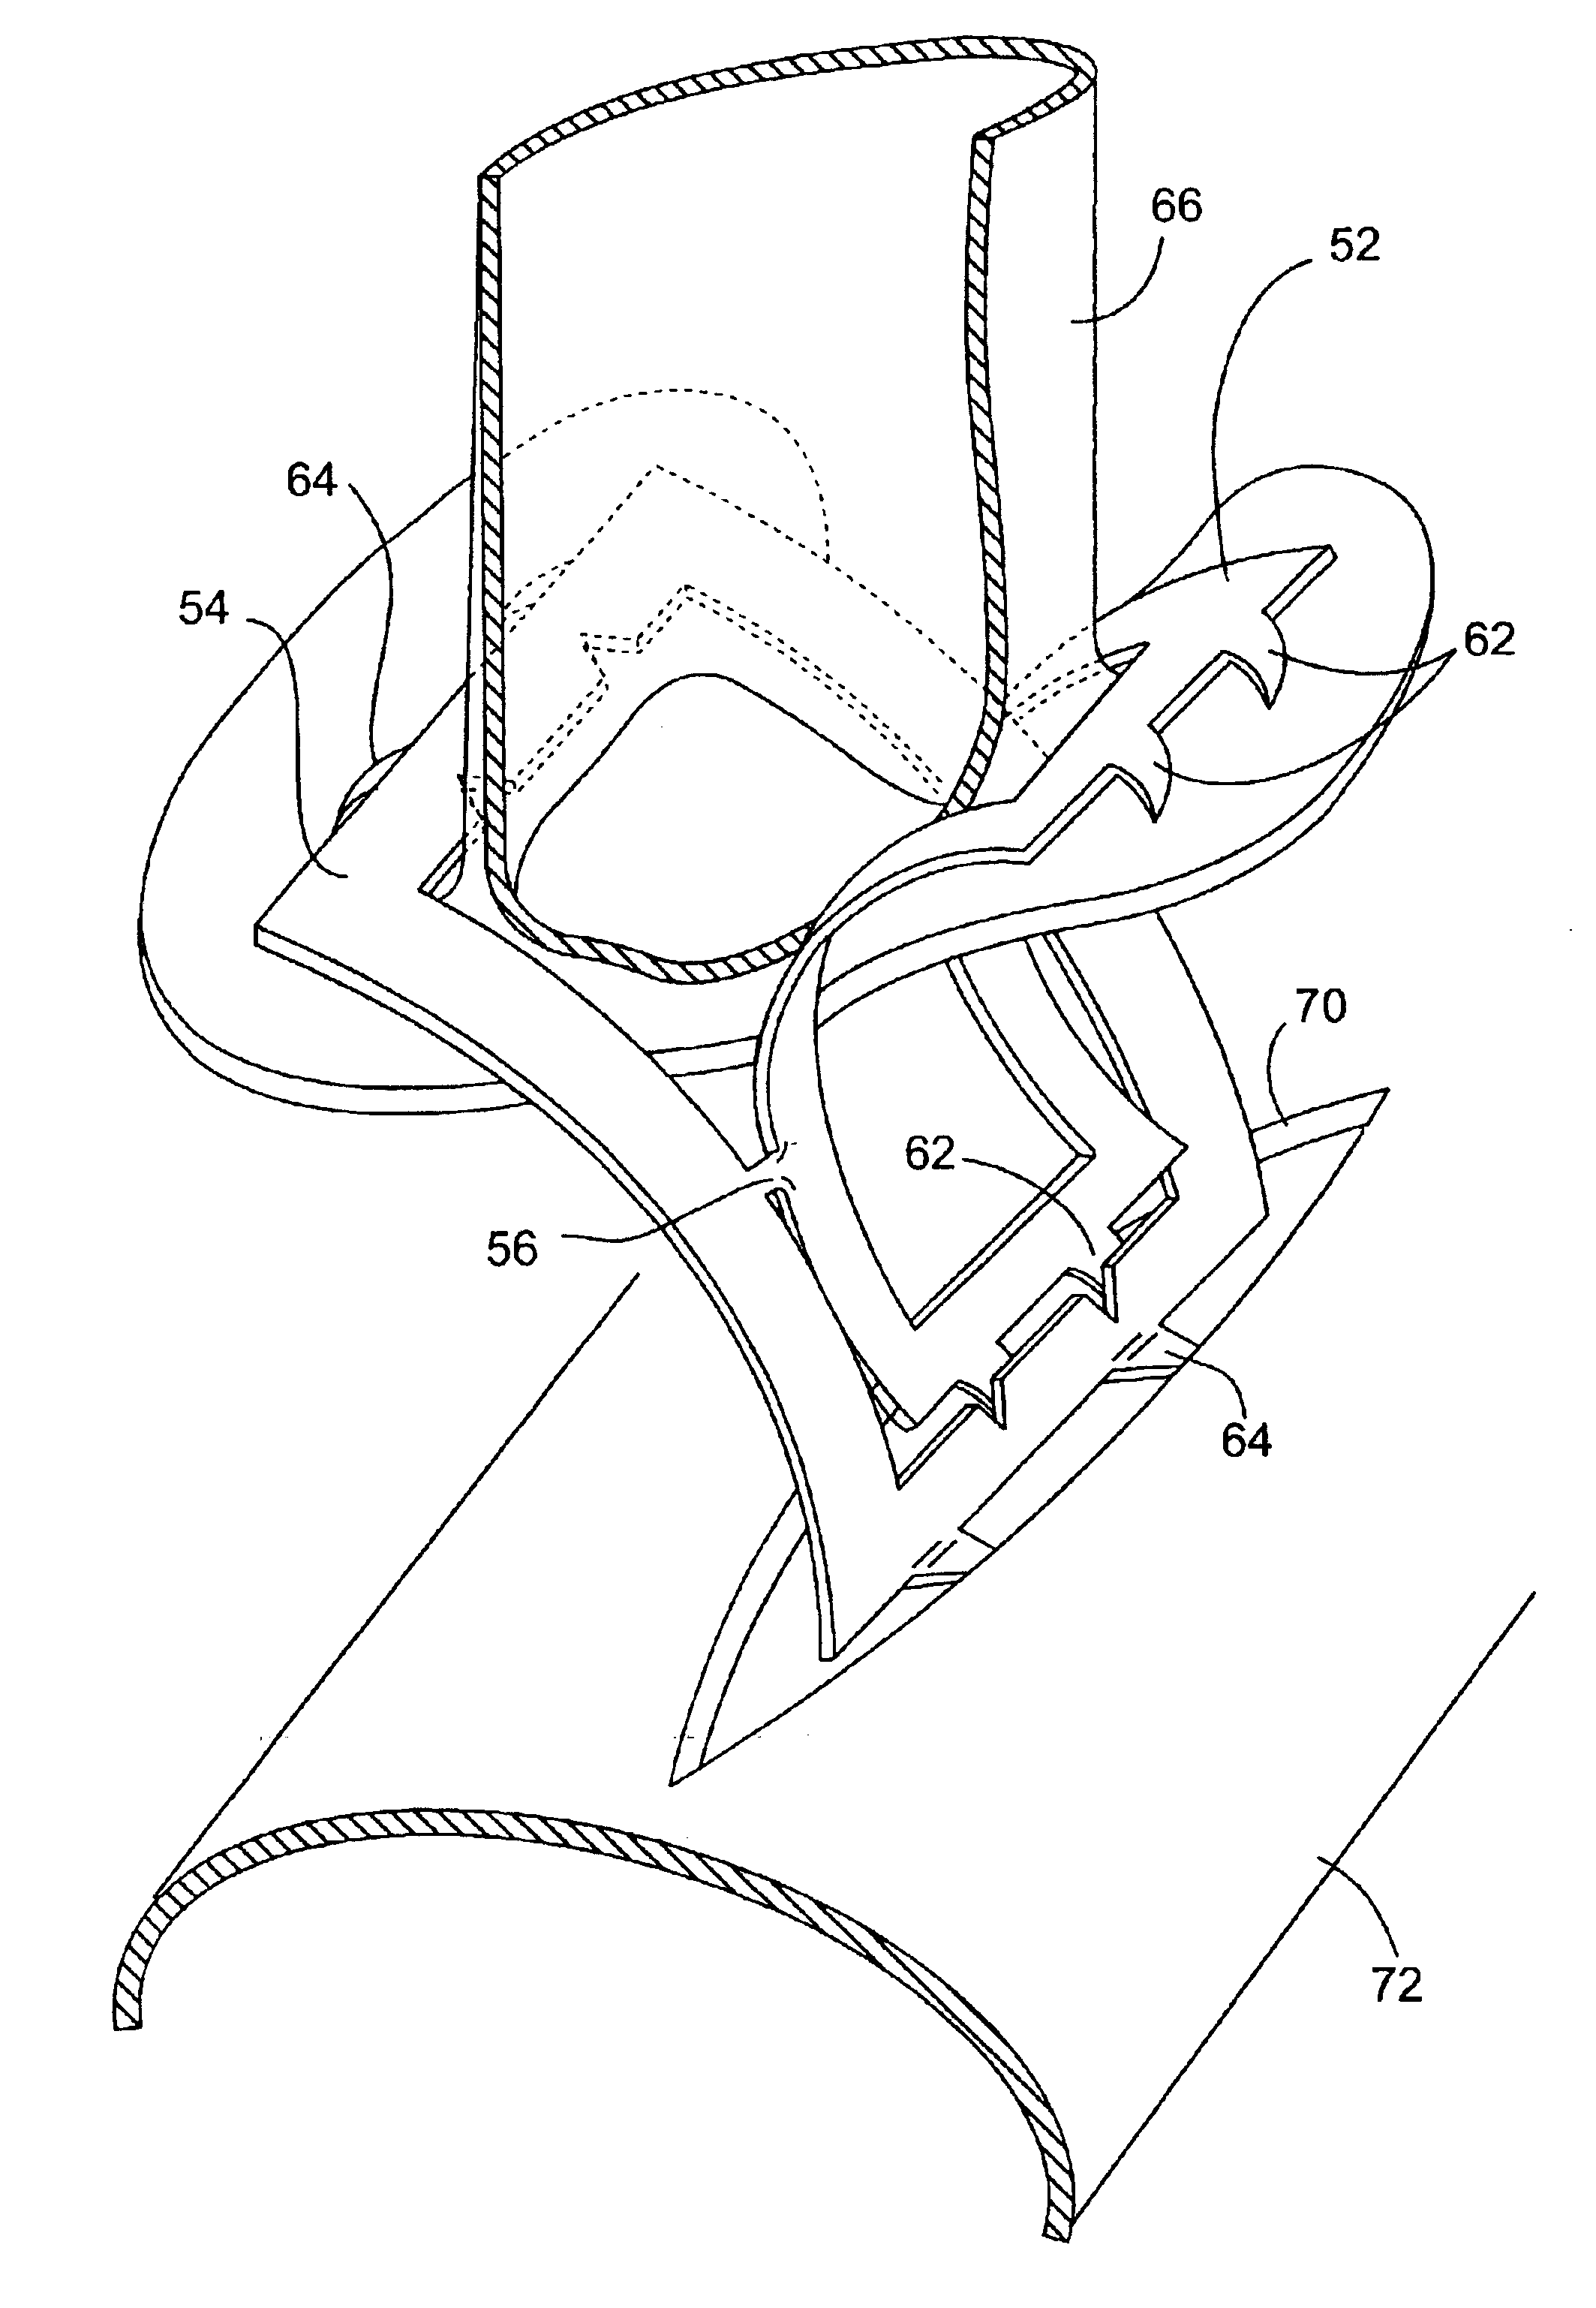 Sutureless closure for connecting a bypass graft to a target vessel